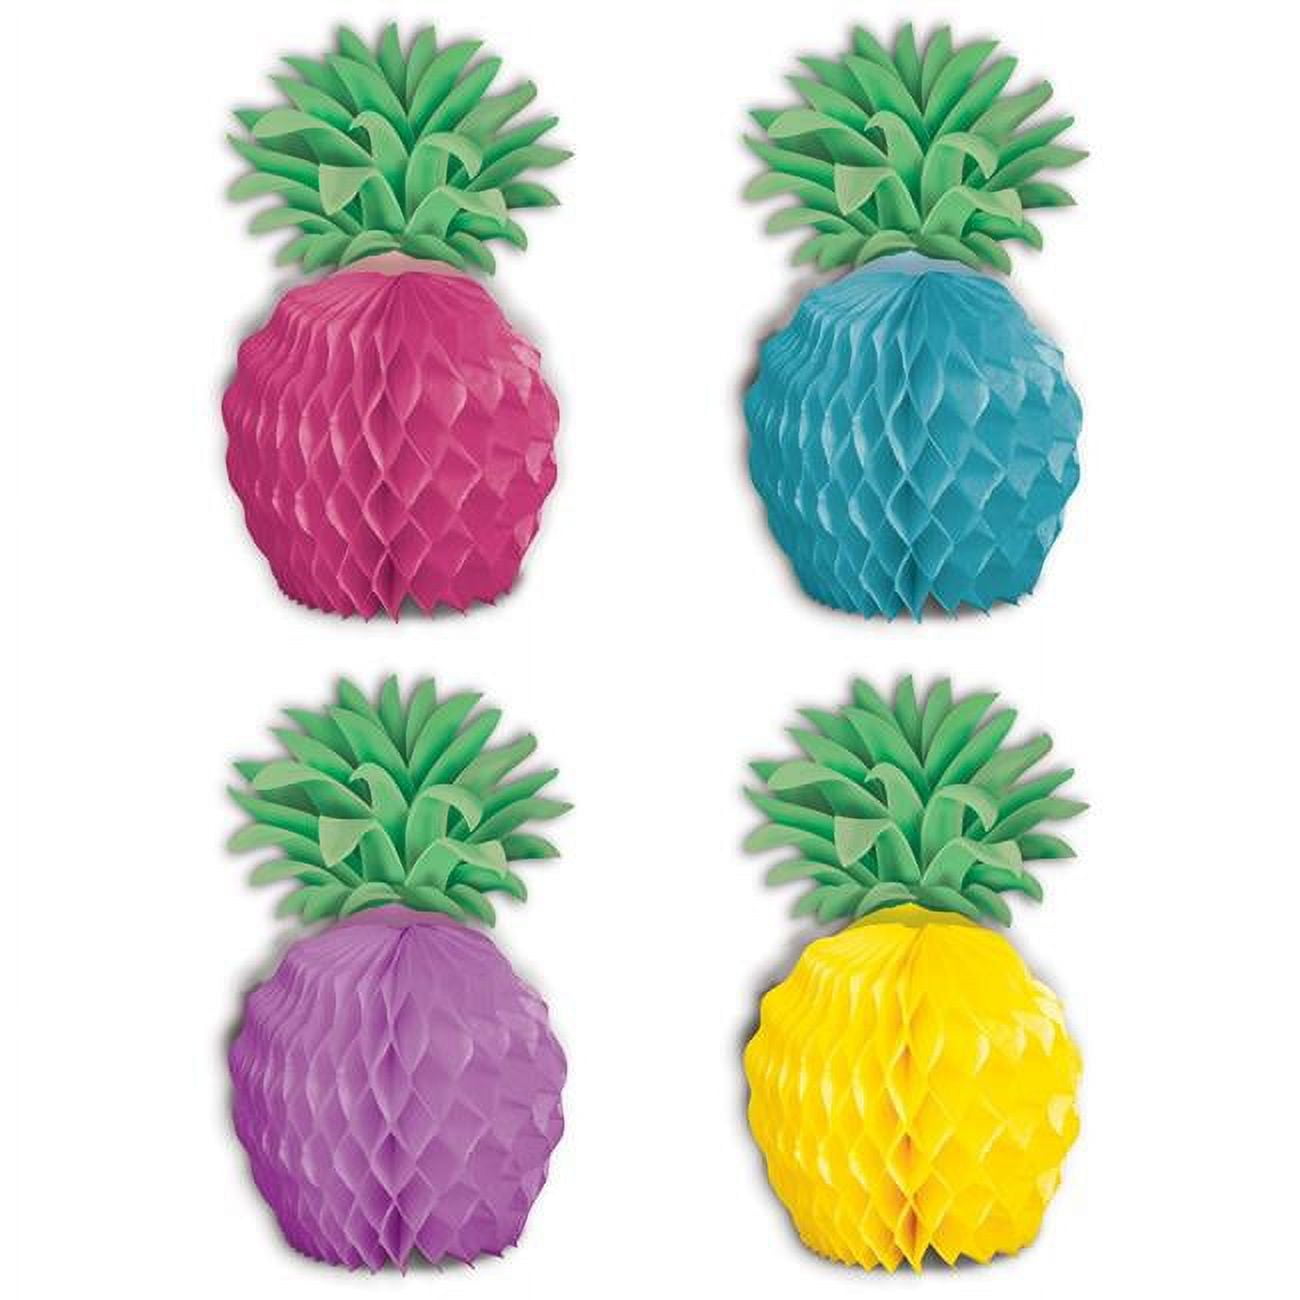 Picture of Beistle 53449 5.25 in. Pineapple Mini Centerpieces - Pack of 12